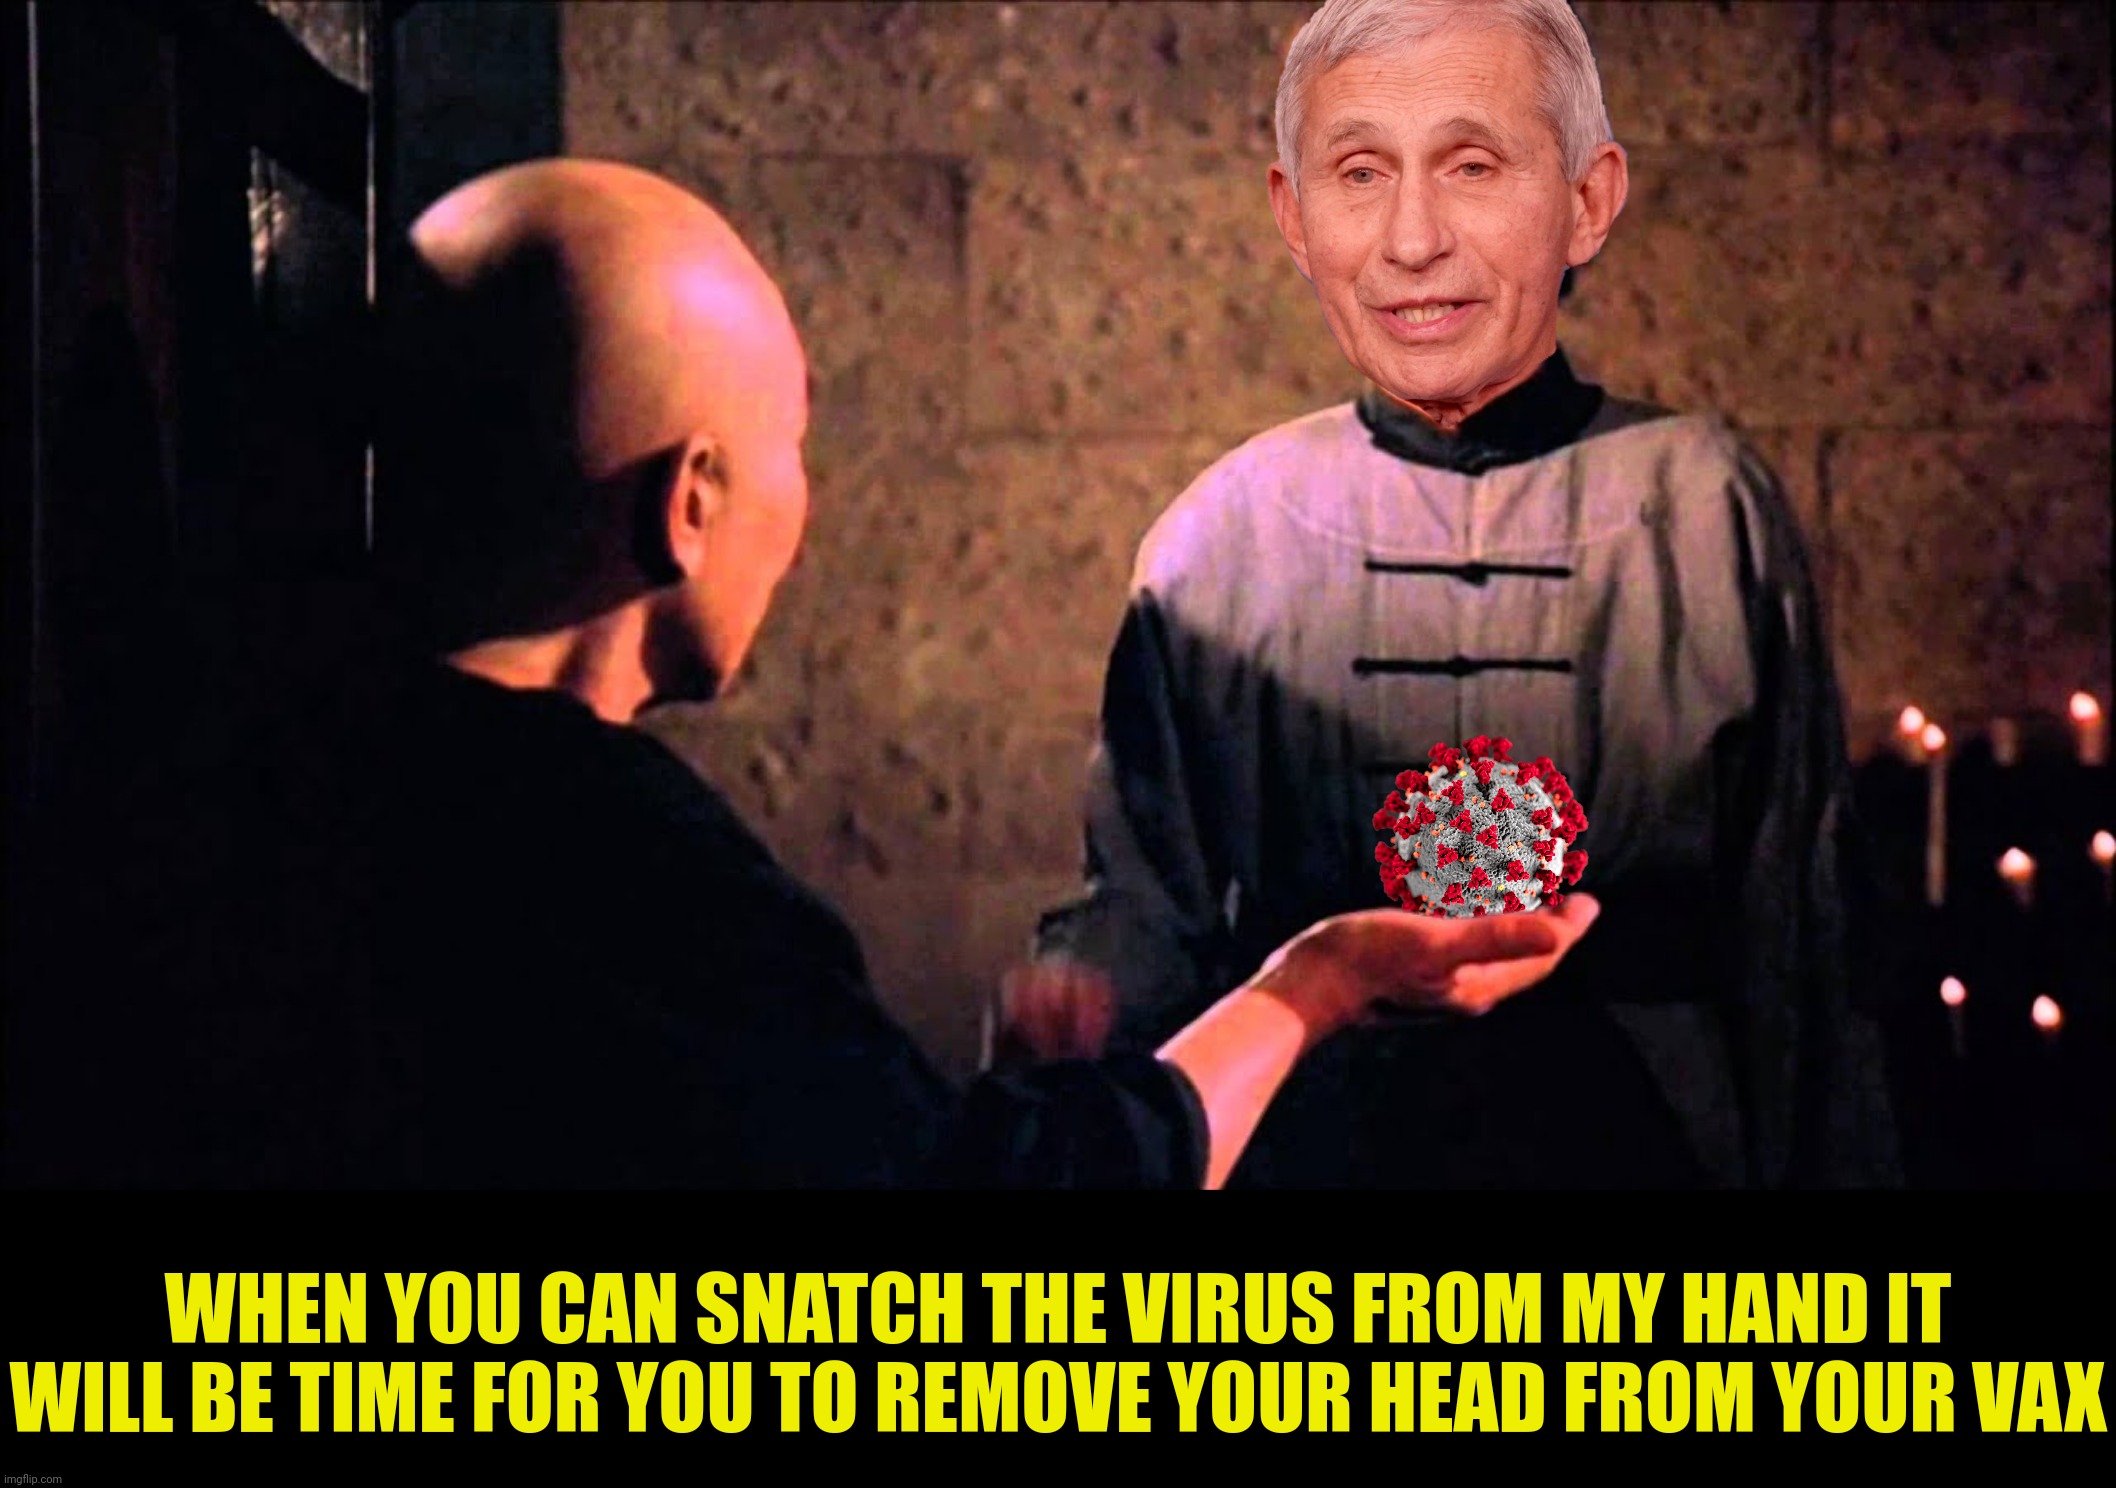 WHEN YOU CAN SNATCH THE VIRUS FROM MY HAND IT WILL BE TIME FOR YOU TO REMOVE YOUR HEAD FROM YOUR VAX | made w/ Imgflip meme maker